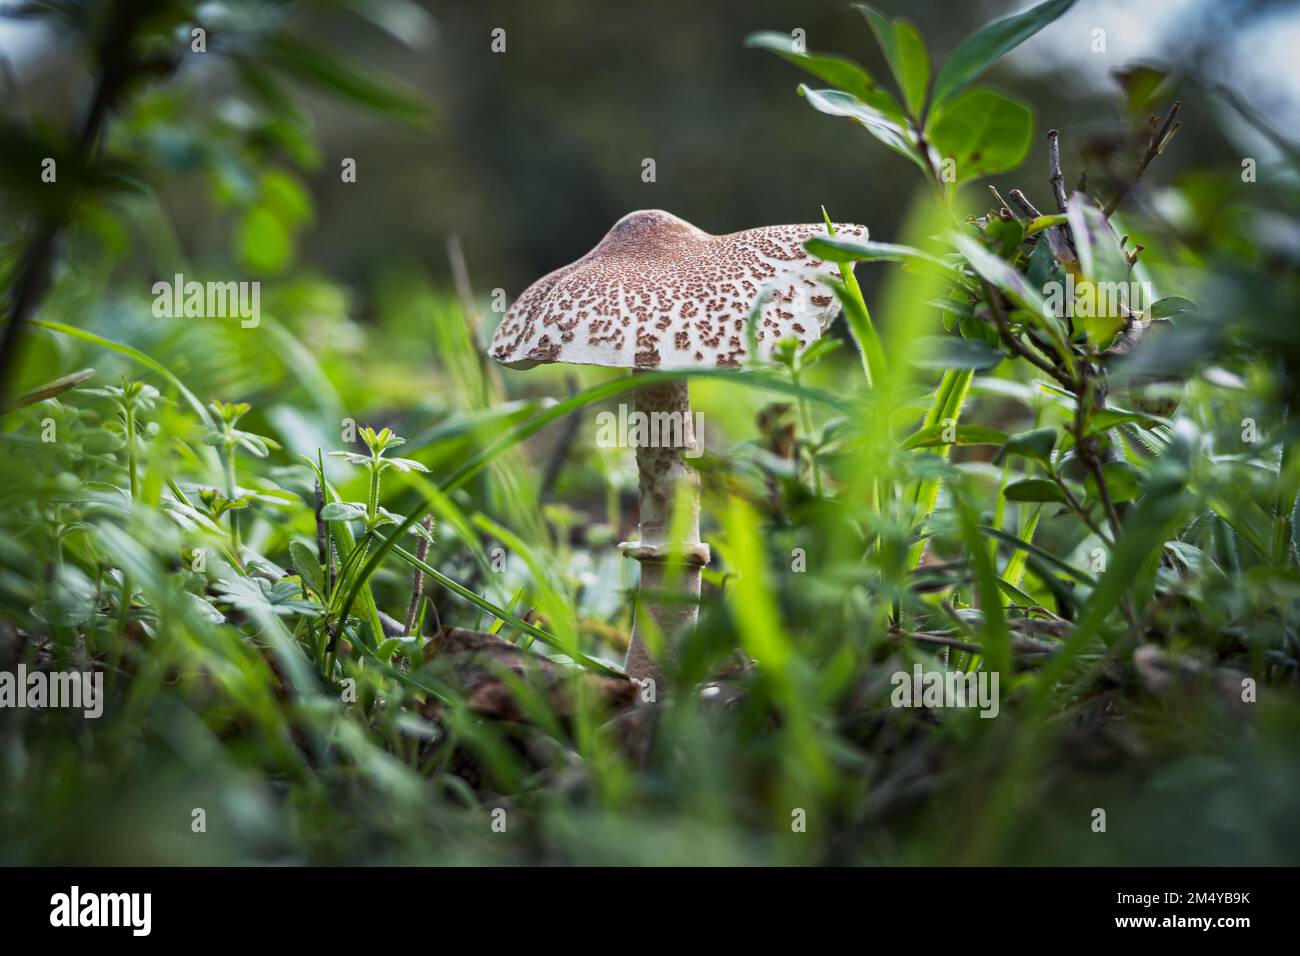 A closeup of the toxic Lepiota brunneoincarnata mushroom growing in the forest after rain. Stock Photo